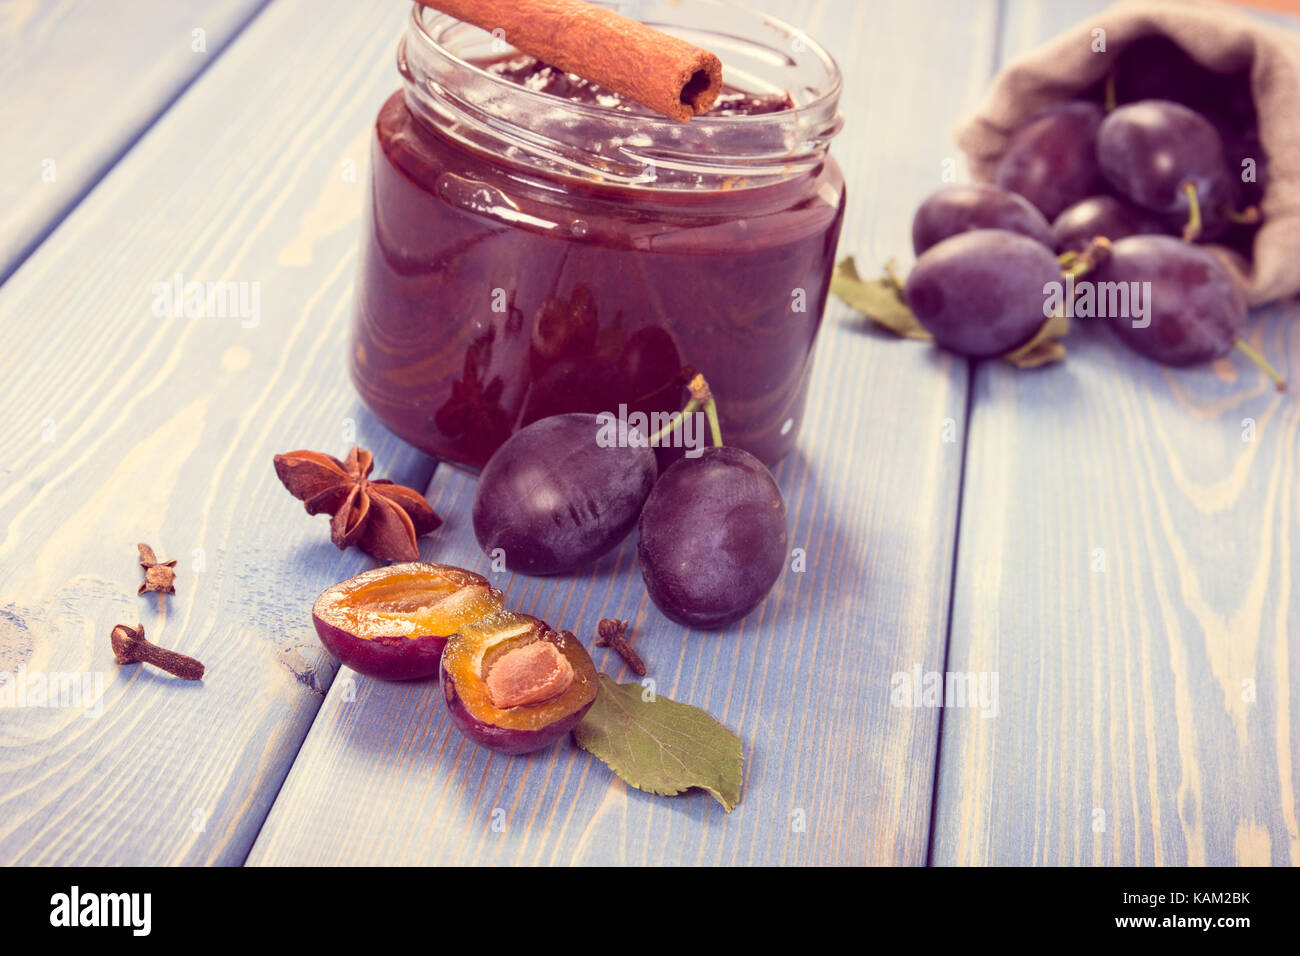 Vintage photo, Fresh homemade plum marmalade in jar, ripe fruits and spices on wooden boards, concept of healthy sweet dessert Stock Photo